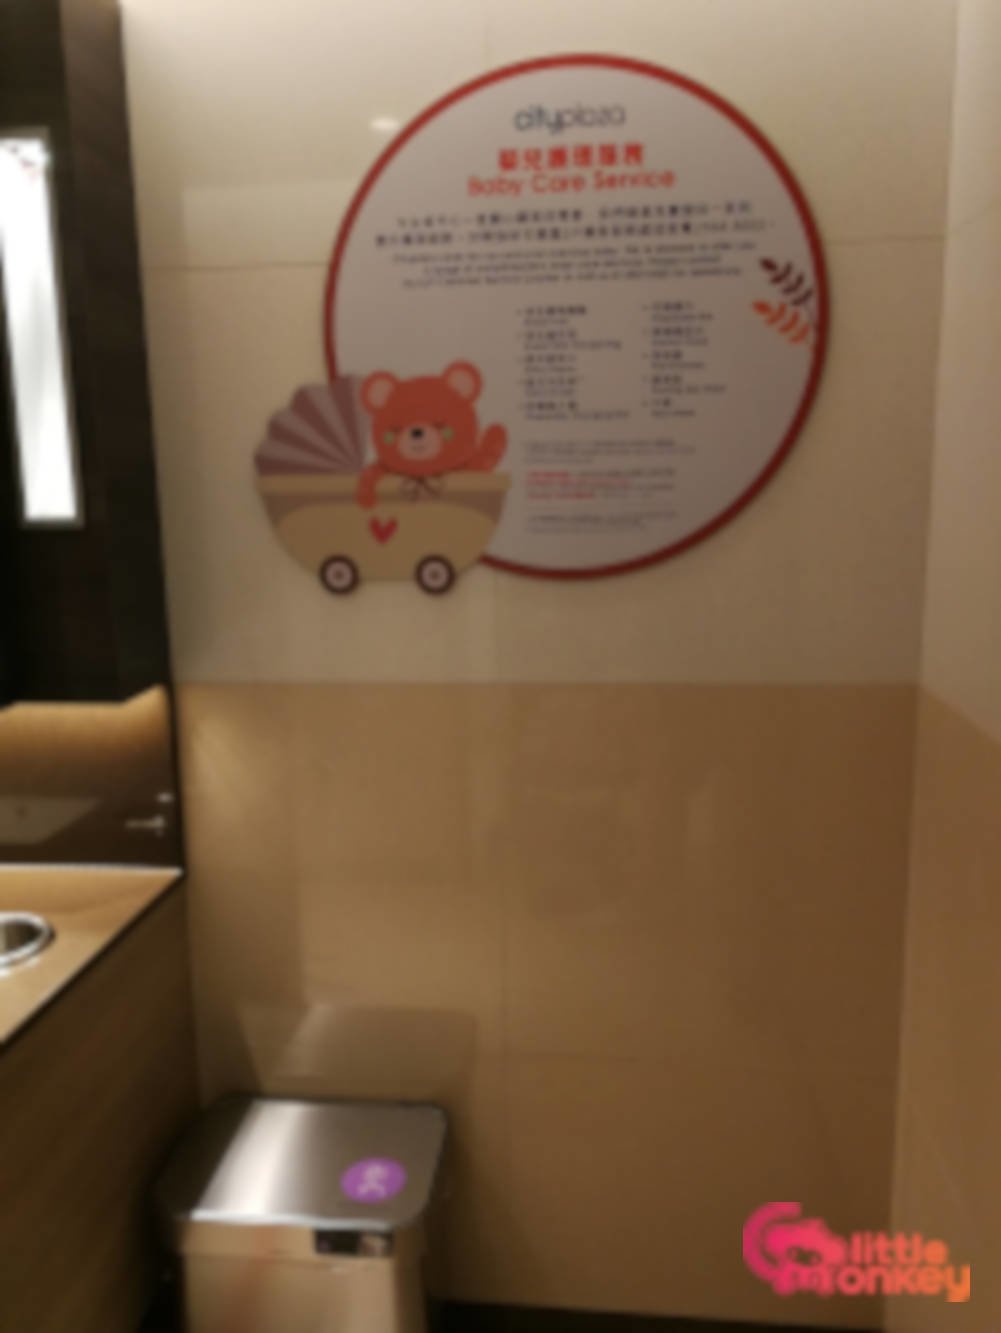 Cityplaza's service information in baby care room